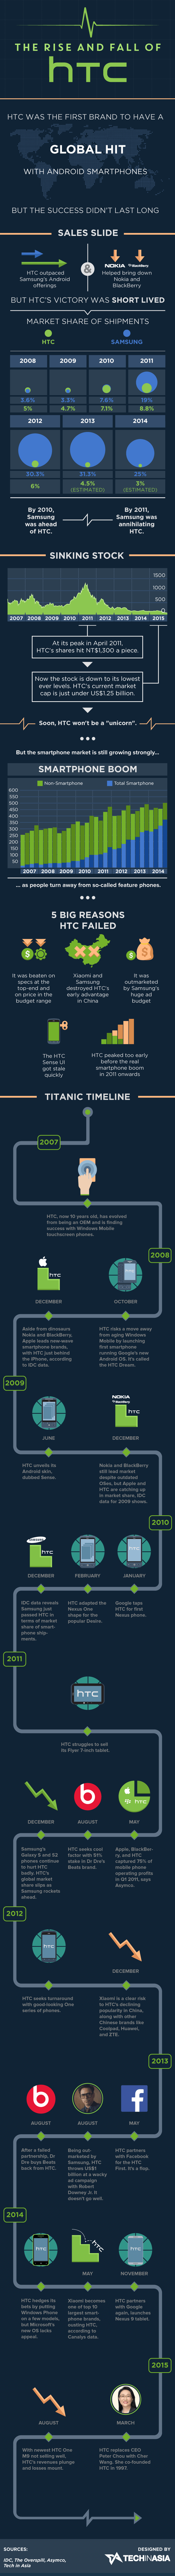 The-rise-and-fall-of-HTC-and-why-HTC-failed-INFOGRAPHIC